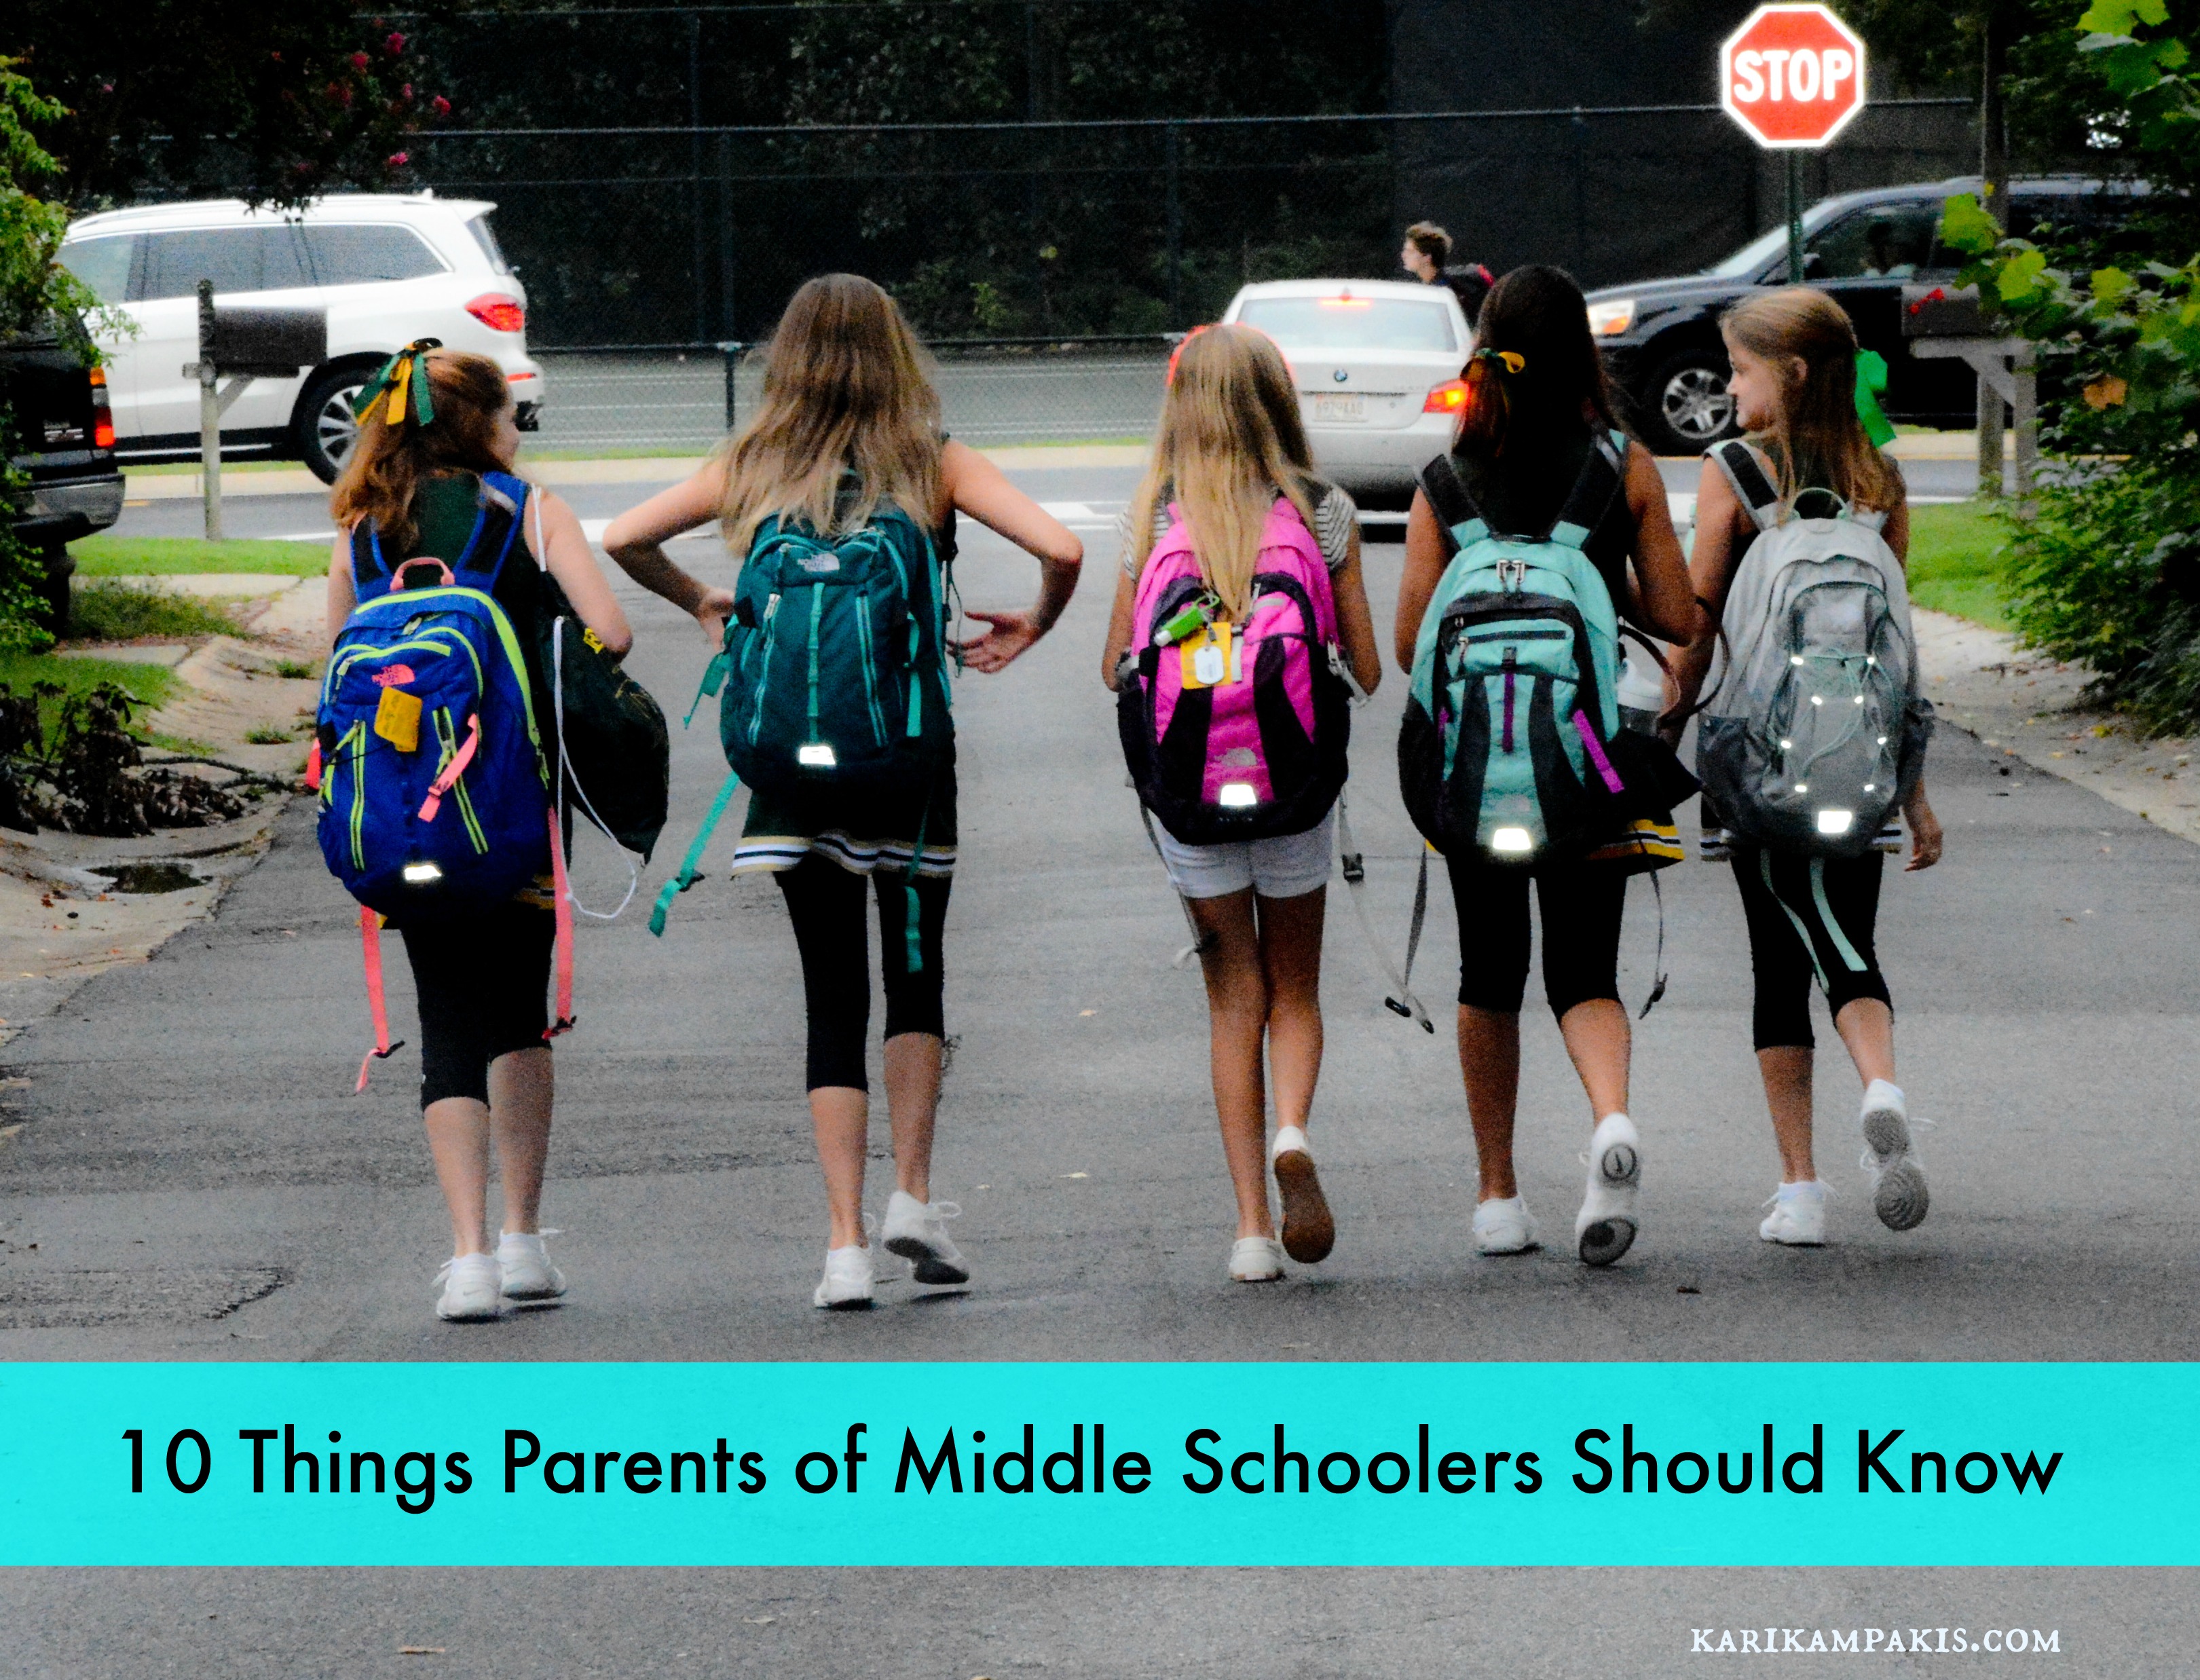 10 Things Parents of Middle Schoolers Should Know